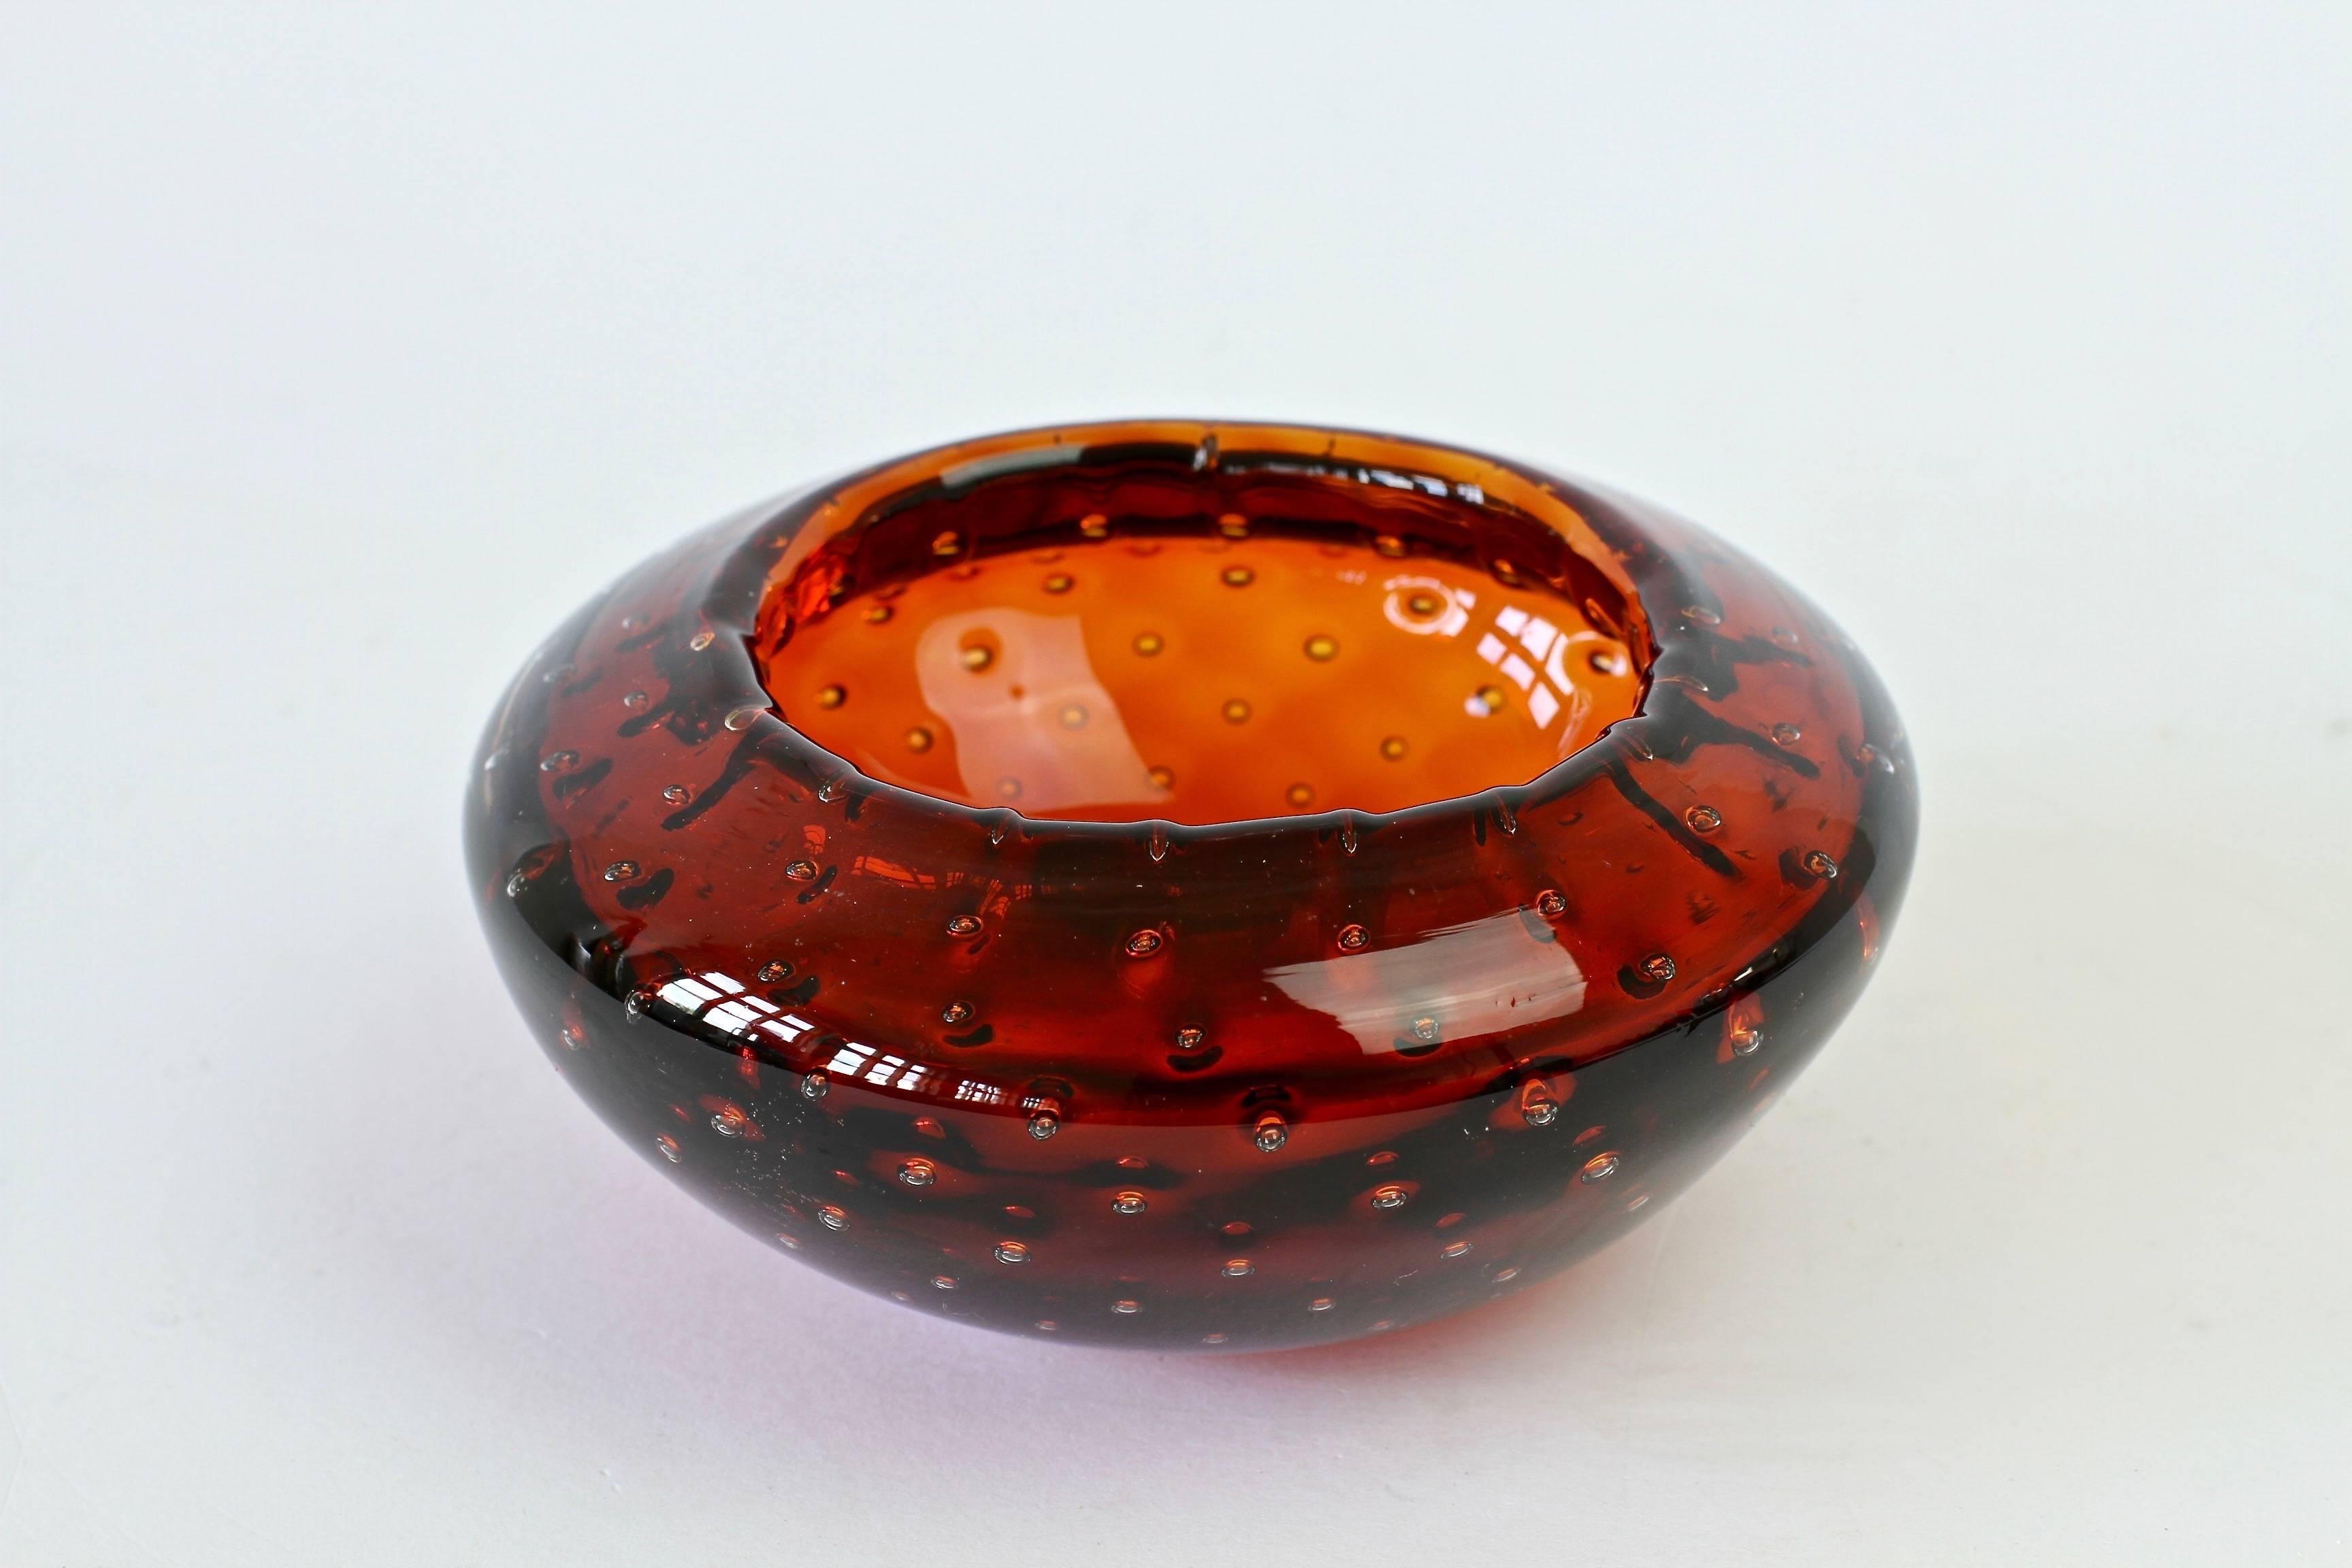 Small petite little round Italian bowl or ashtray by Cenedese. Made from amber colored / coloured Murano glass bullicante or 